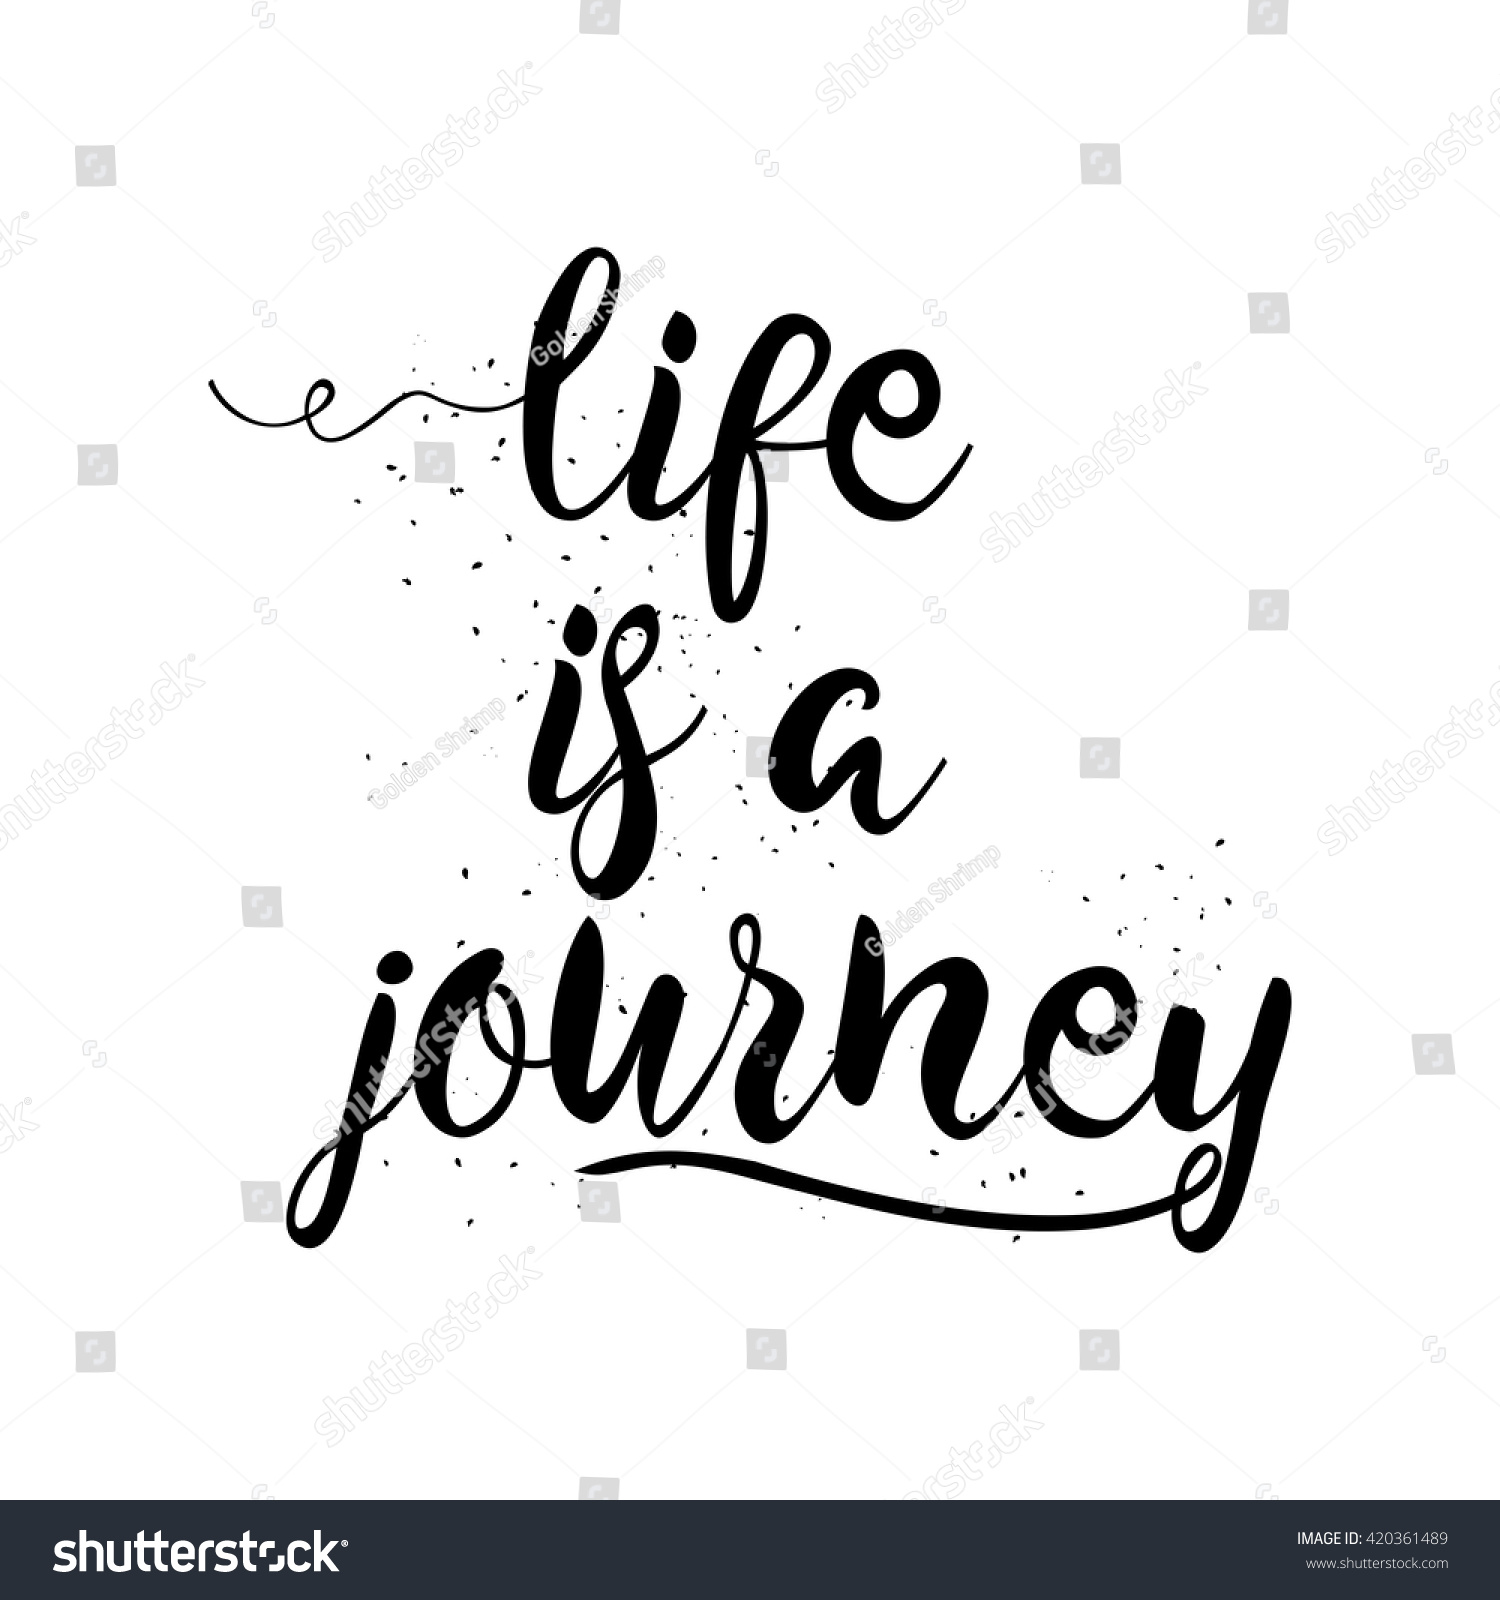 Life is a journey. Life is a Journey прописными буквами. Тату Life is a Journey. Life is a Journey красивые буквы.